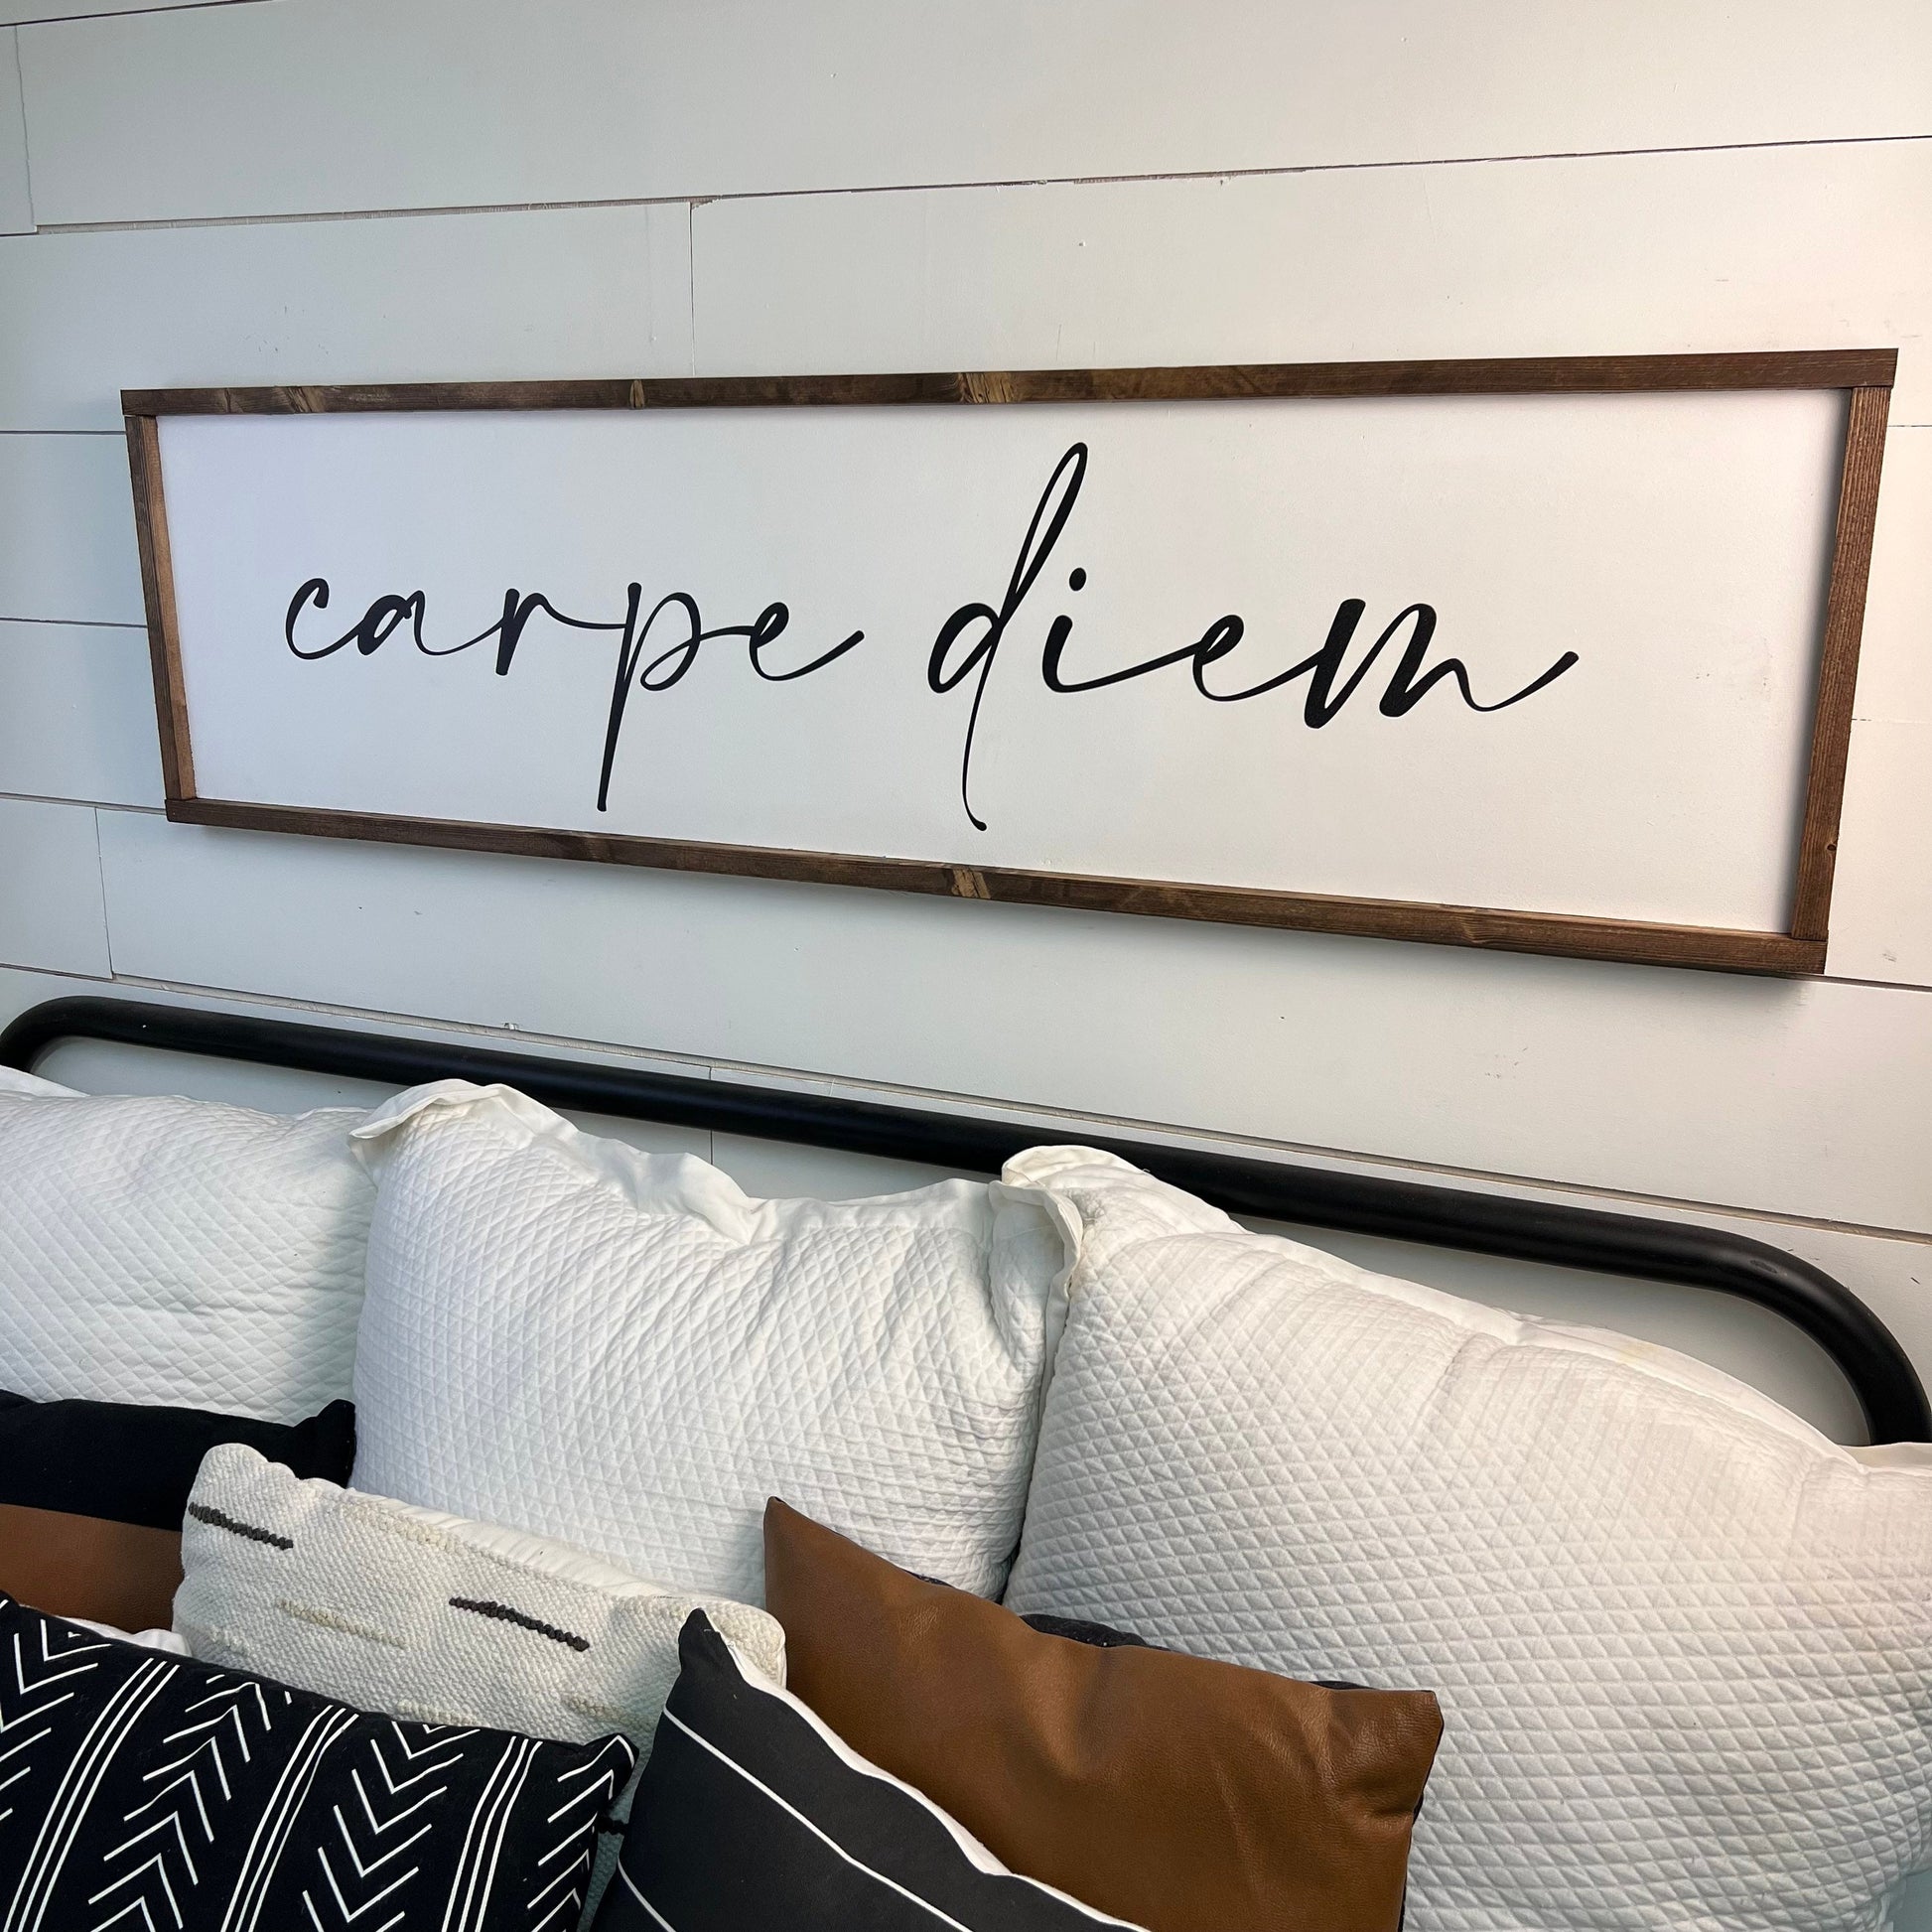 carpe diem - above over the bed sign - master bedroom wall art [FREE SHIPPING!]